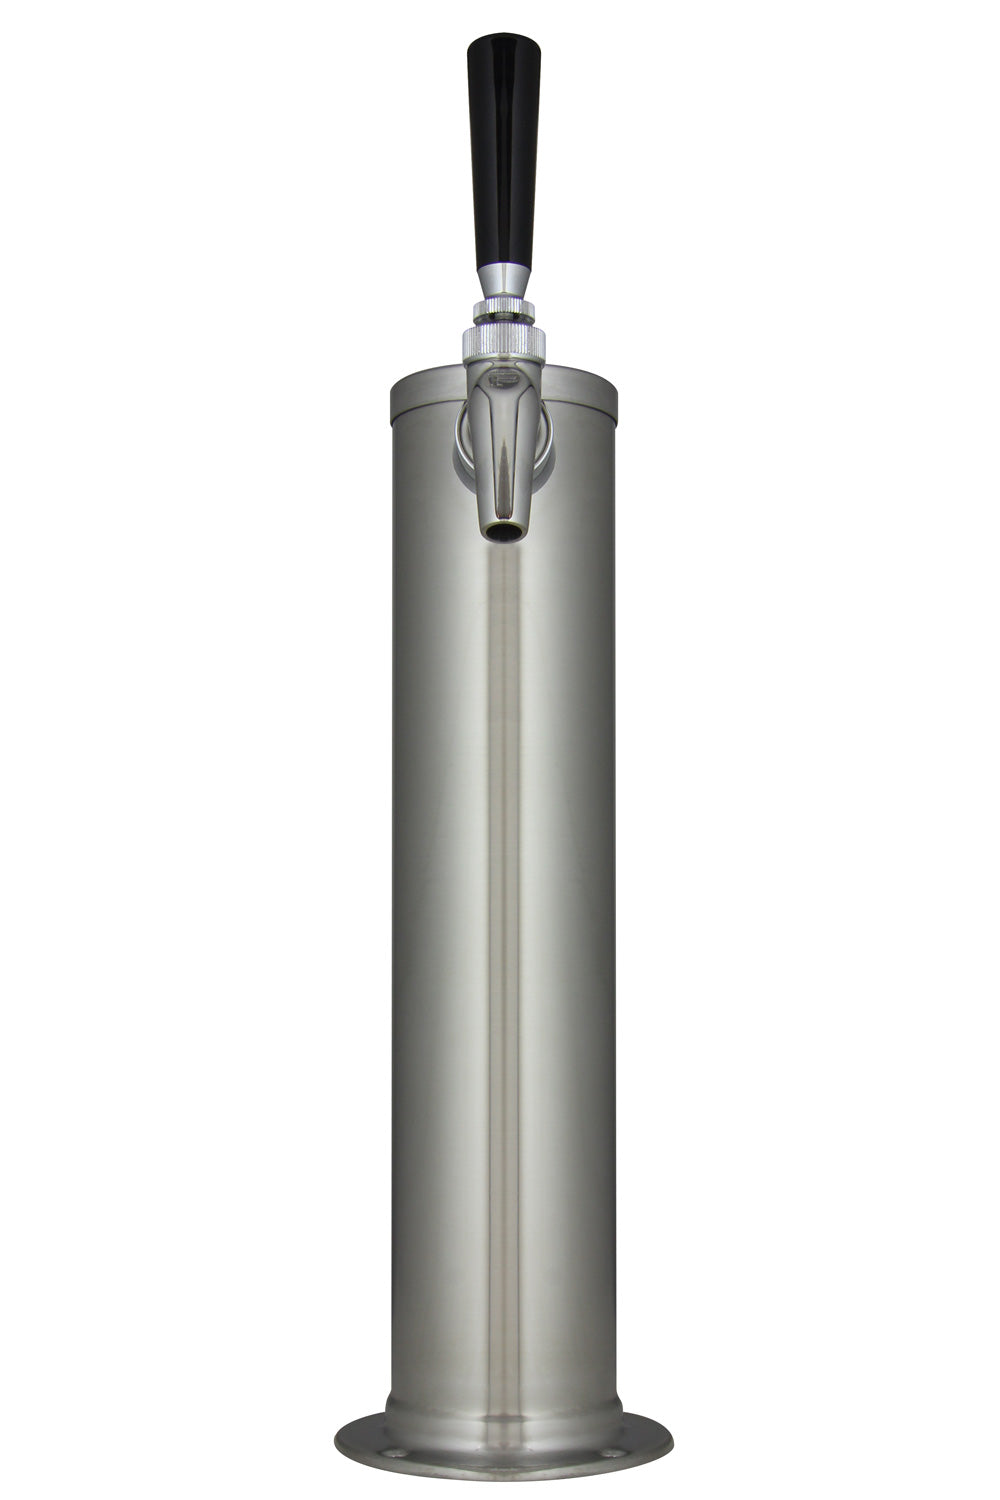 14" Tall Brushed Stainless Steel 1-Faucet Draft Beer Tower - Perlick Faucet